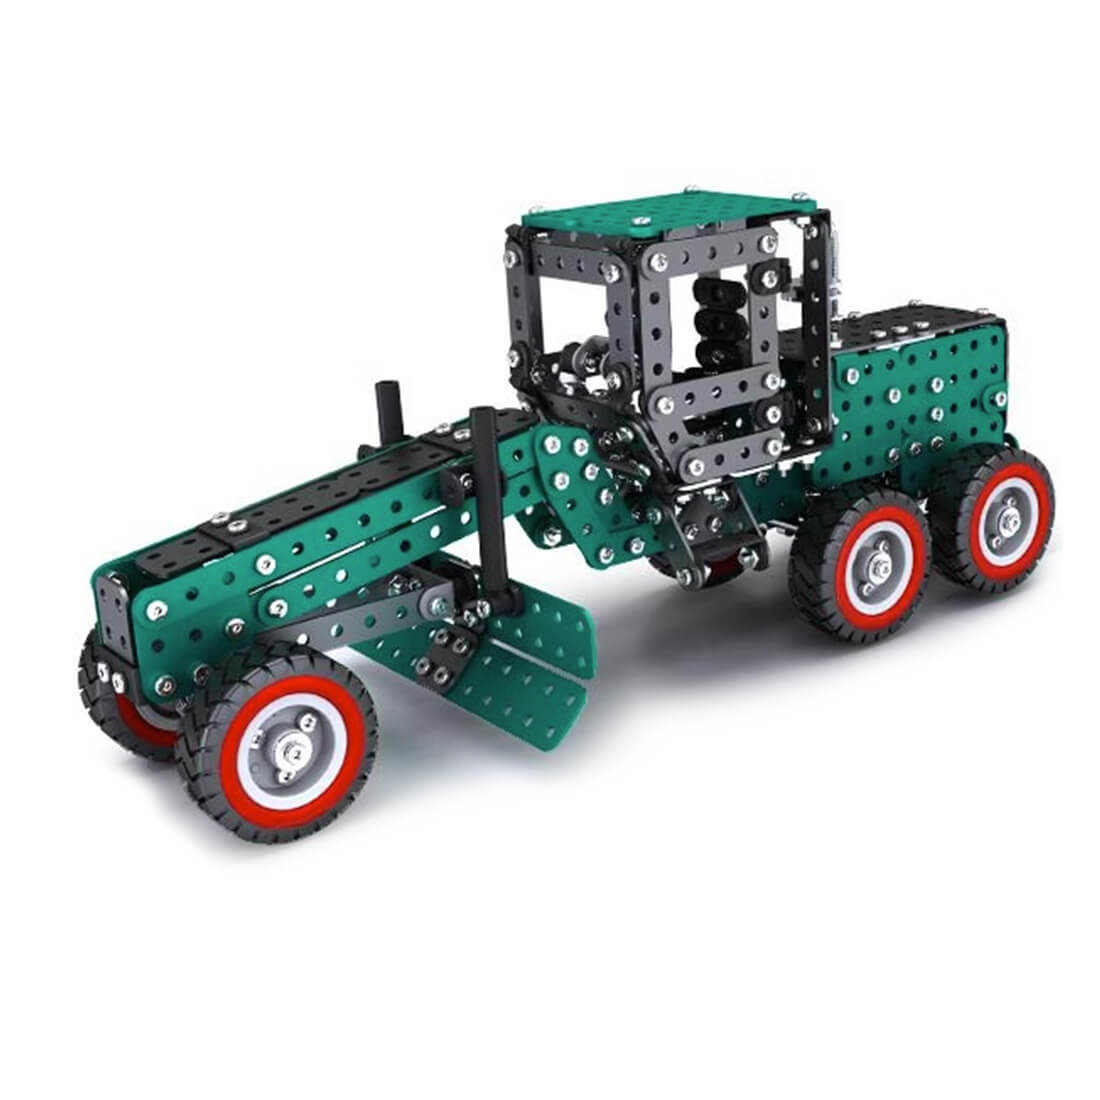 Metal Assembly Farm Grading Machine Model 3D DIY Agricultural Vehicle Assembly Model Creative Ornaments (680+PCS)